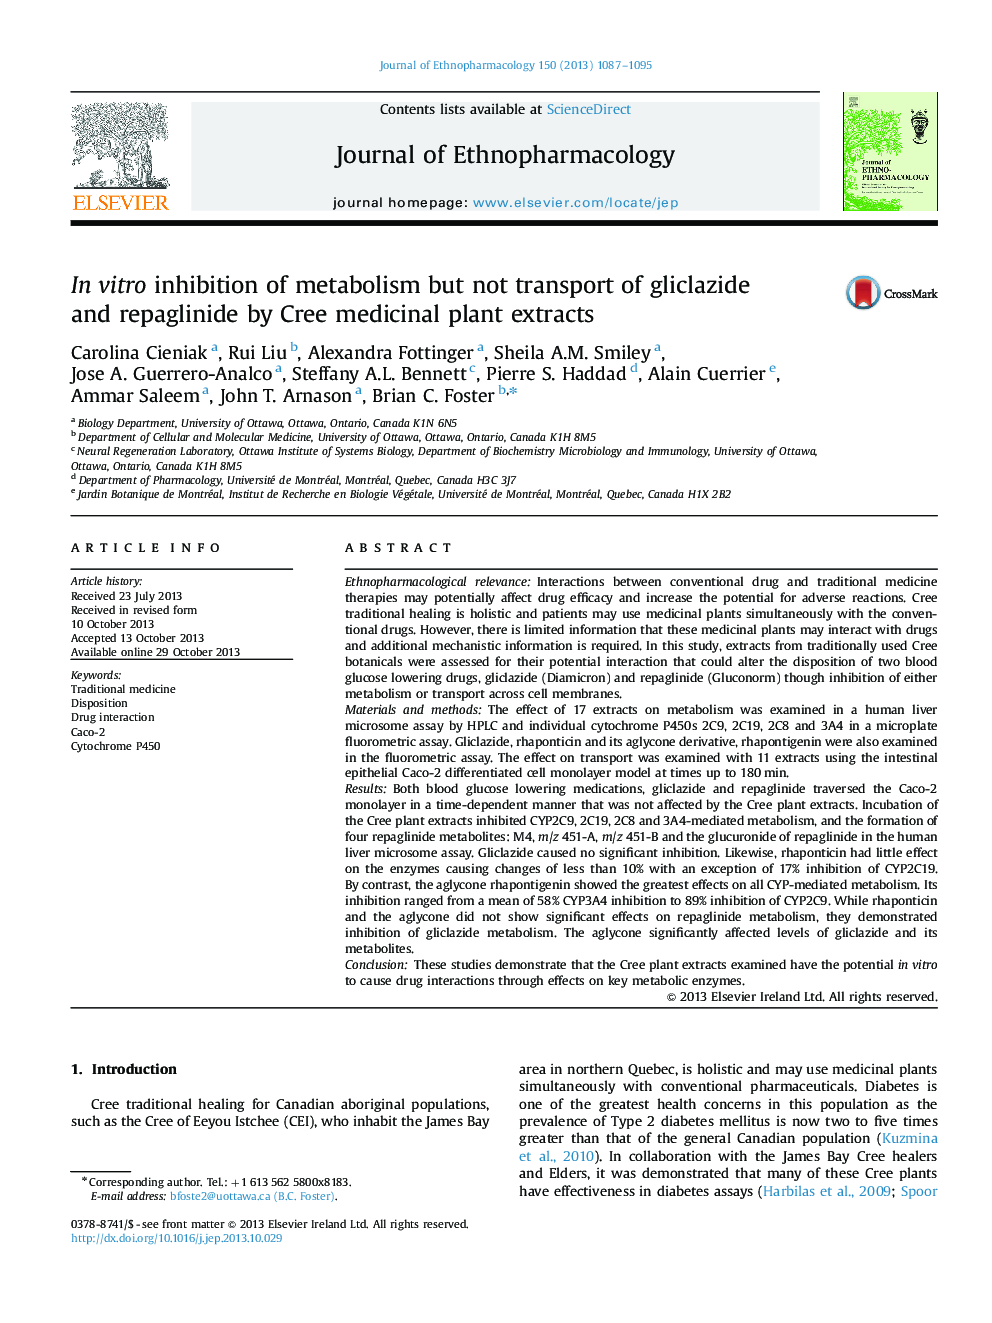 In vitro inhibition of metabolism but not transport of gliclazide and repaglinide by Cree medicinal plant extracts